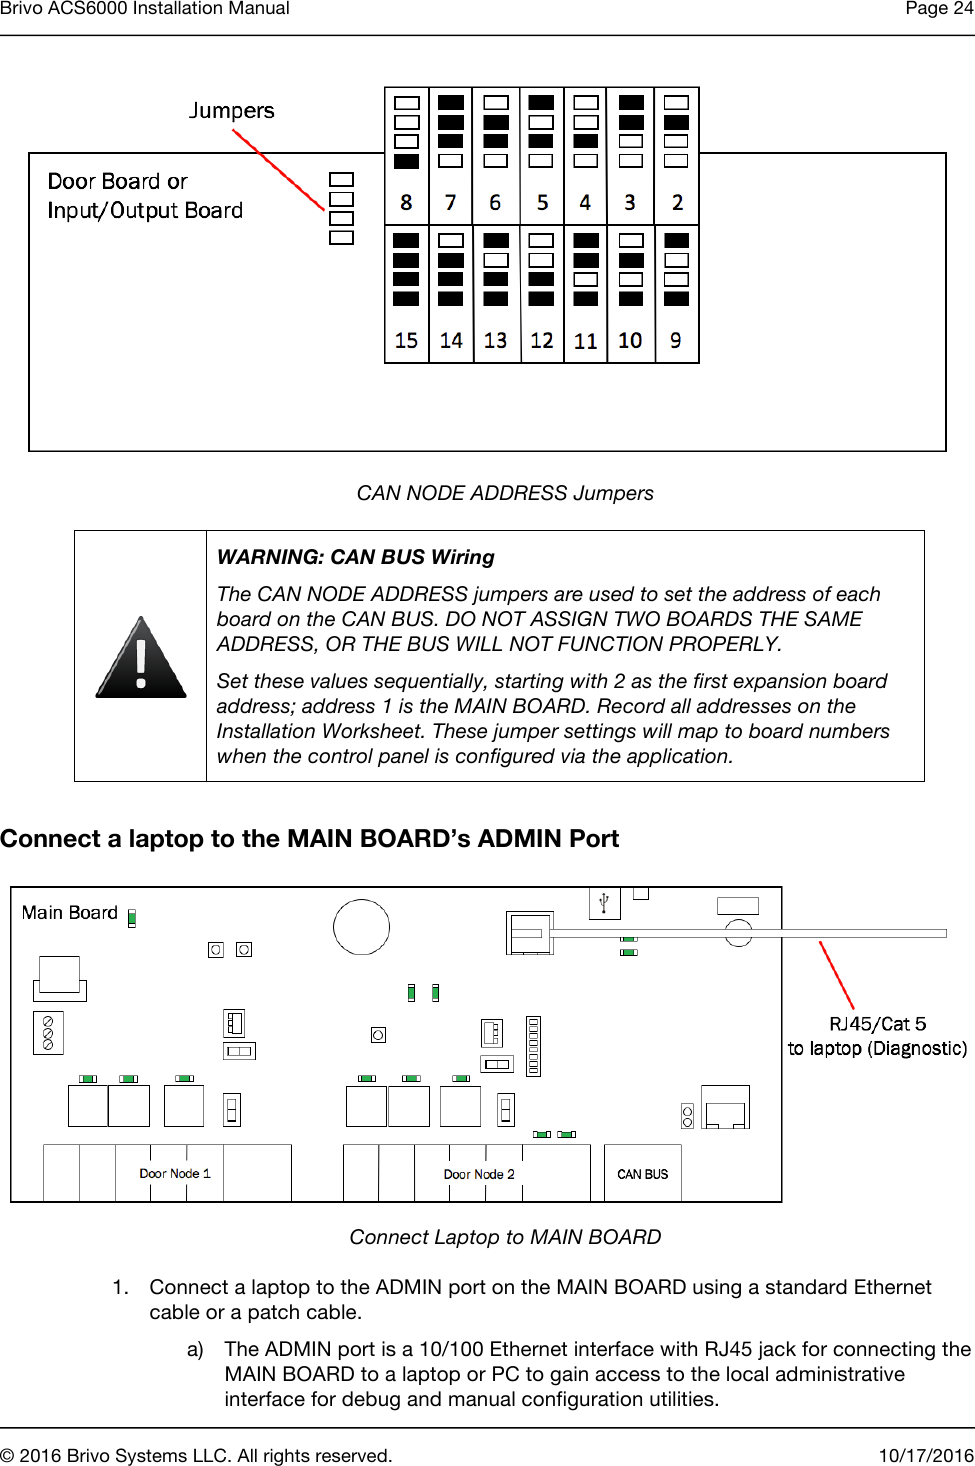 Brivo ACS6000 Installation Manual Page 24       © 2016 Brivo Systems LLC. All rights reserved. 10/17/2016   CAN NODE ADDRESS Jumpers  WARNING: CAN BUS Wiring The CAN NODE ADDRESS jumpers are used to set the address of each board on the CAN BUS. DO NOT ASSIGN TWO BOARDS THE SAME ADDRESS, OR THE BUS WILL NOT FUNCTION PROPERLY. Set these values sequentially, starting with 2 as the first expansion board address; address 1 is the MAIN BOARD. Record all addresses on the Installation Worksheet. These jumper settings will map to board numbers when the control panel is configured via the application.  Connect a laptop to the MAIN BOARD’s ADMIN Port  Connect Laptop to MAIN BOARD 1. Connect a laptop to the ADMIN port on the MAIN BOARD using a standard Ethernet cable or a patch cable. a) The ADMIN port is a 10/100 Ethernet interface with RJ45 jack for connecting the MAIN BOARD to a laptop or PC to gain access to the local administrative interface for debug and manual configuration utilities. 